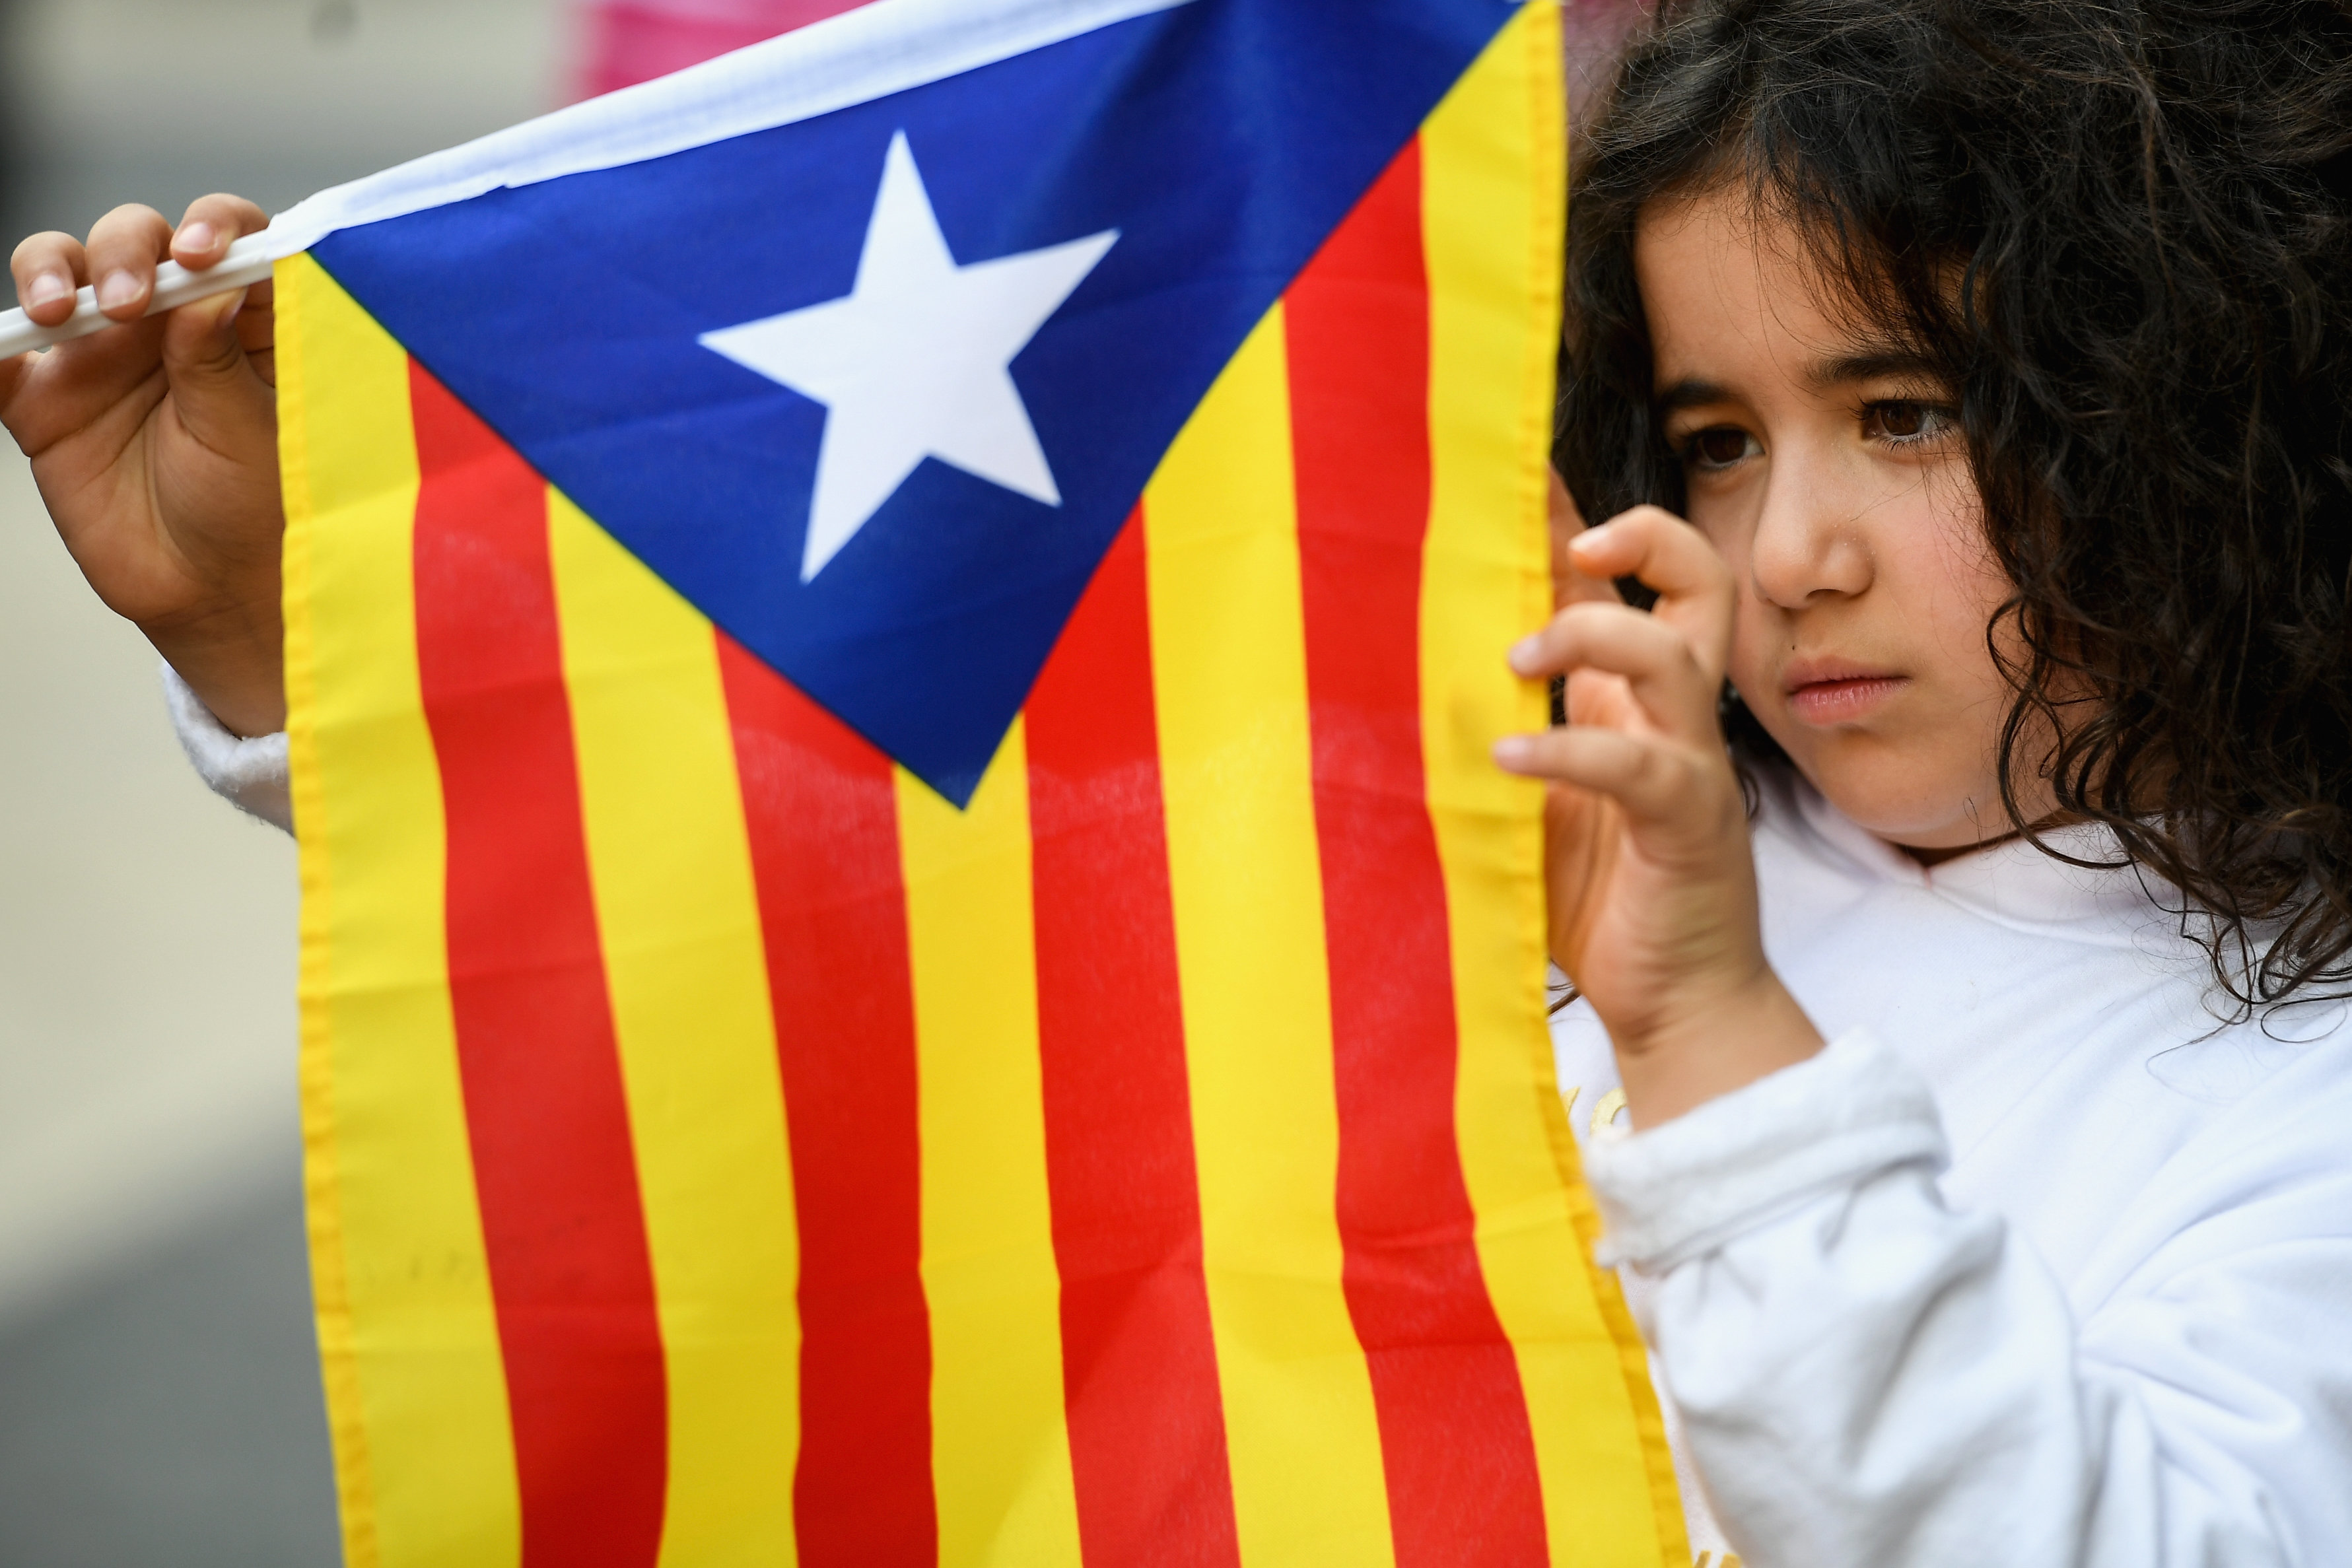 Catalan independence supporters gather outside of the Palau Catalan Regional Government Building on&nbsp;Saturday